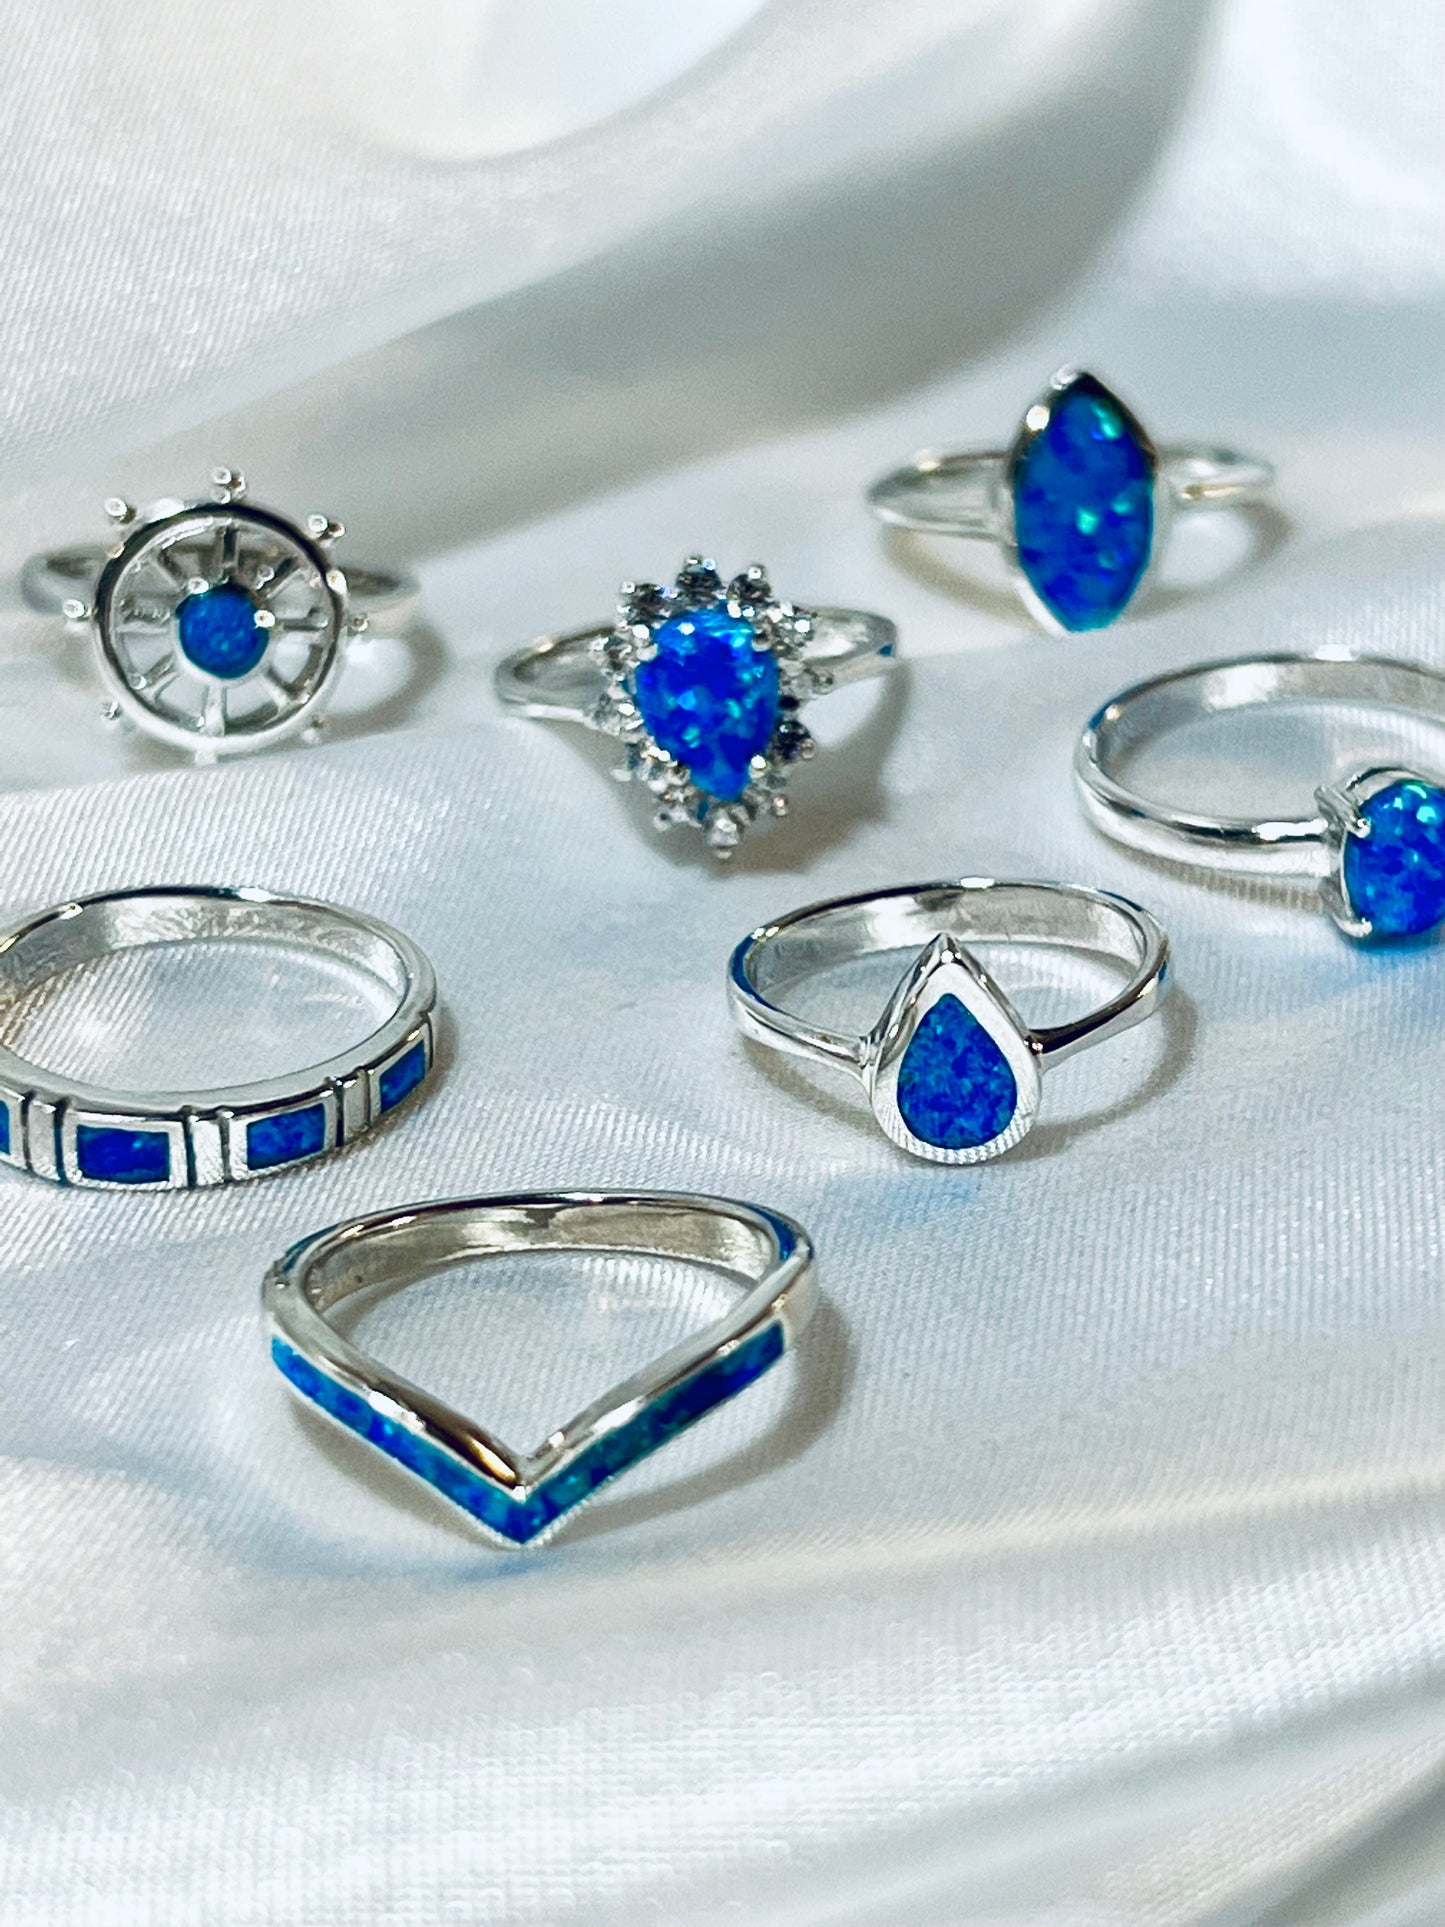 
                  
                    A collection of Elegant Chevron Lab Opal Rings with opal and blue gemstone accents displayed on a white fabric.
                  
                